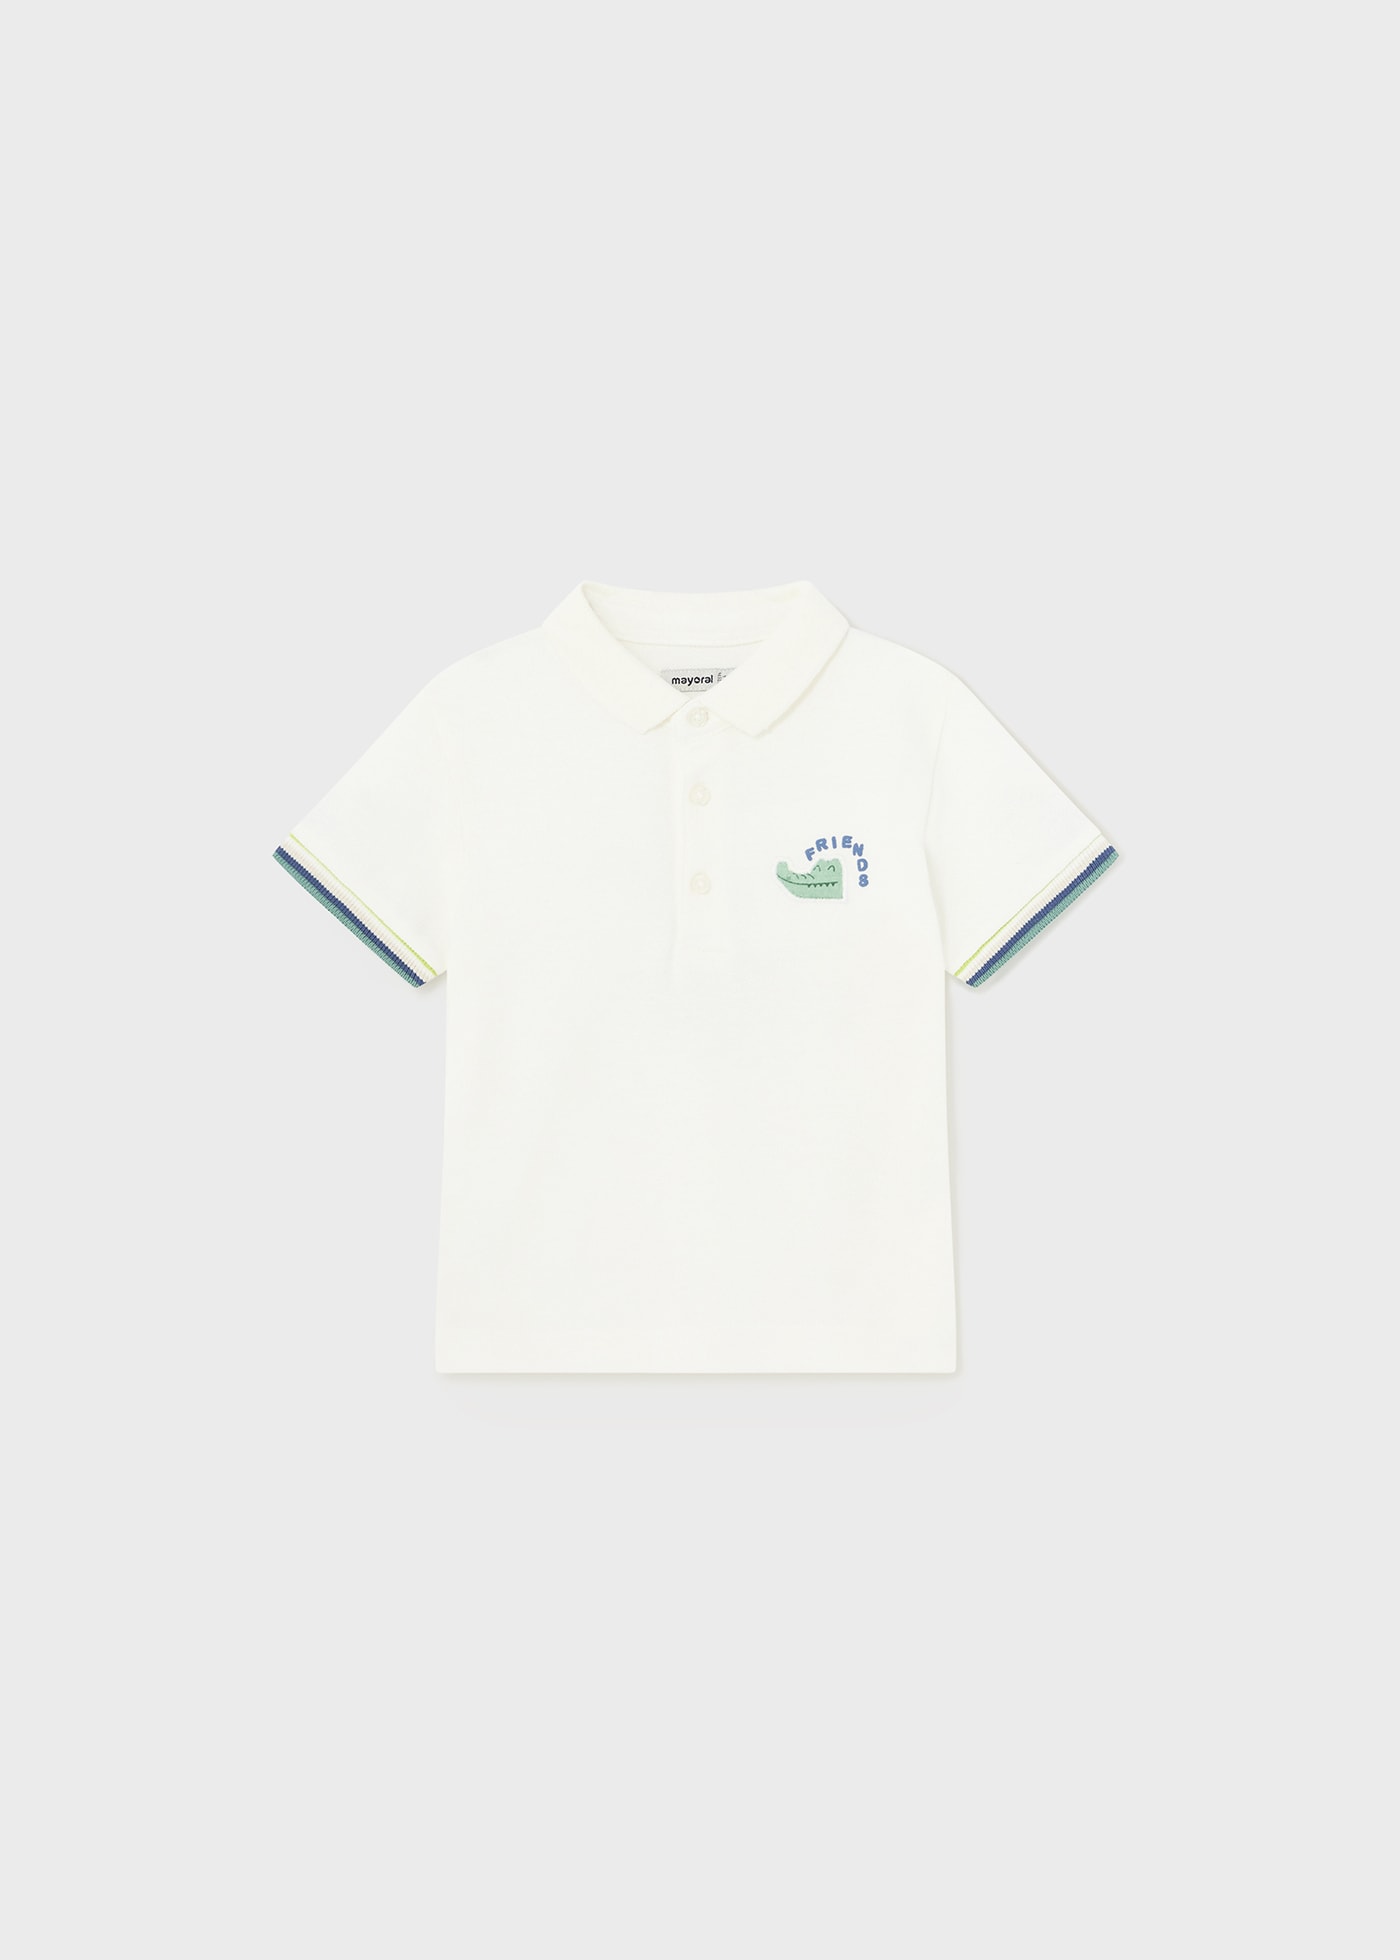 Poloshirt Muster Better Cotton Baby